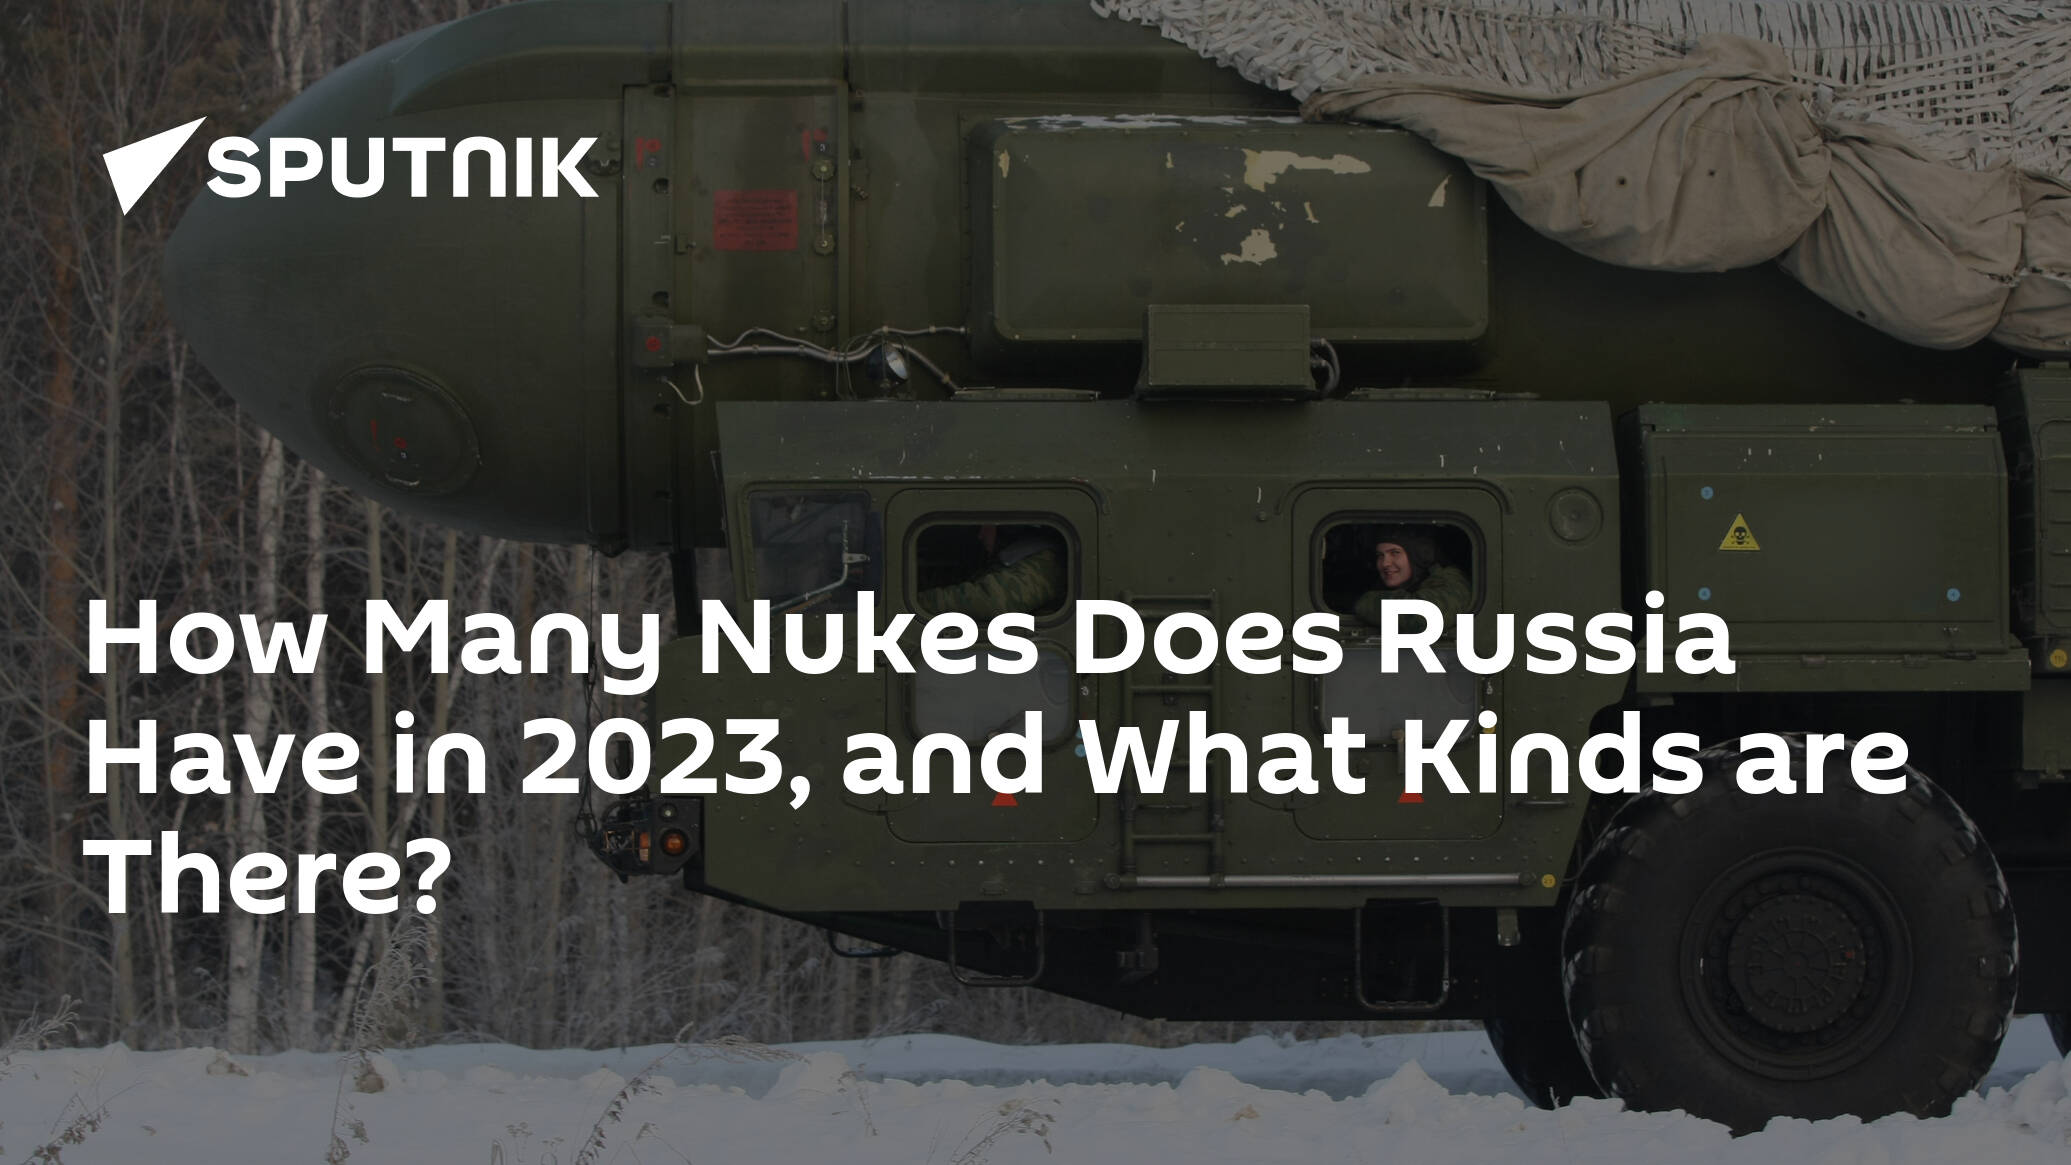 How Many Nukes Does Russia Have in 2023, and What Kinds are There?